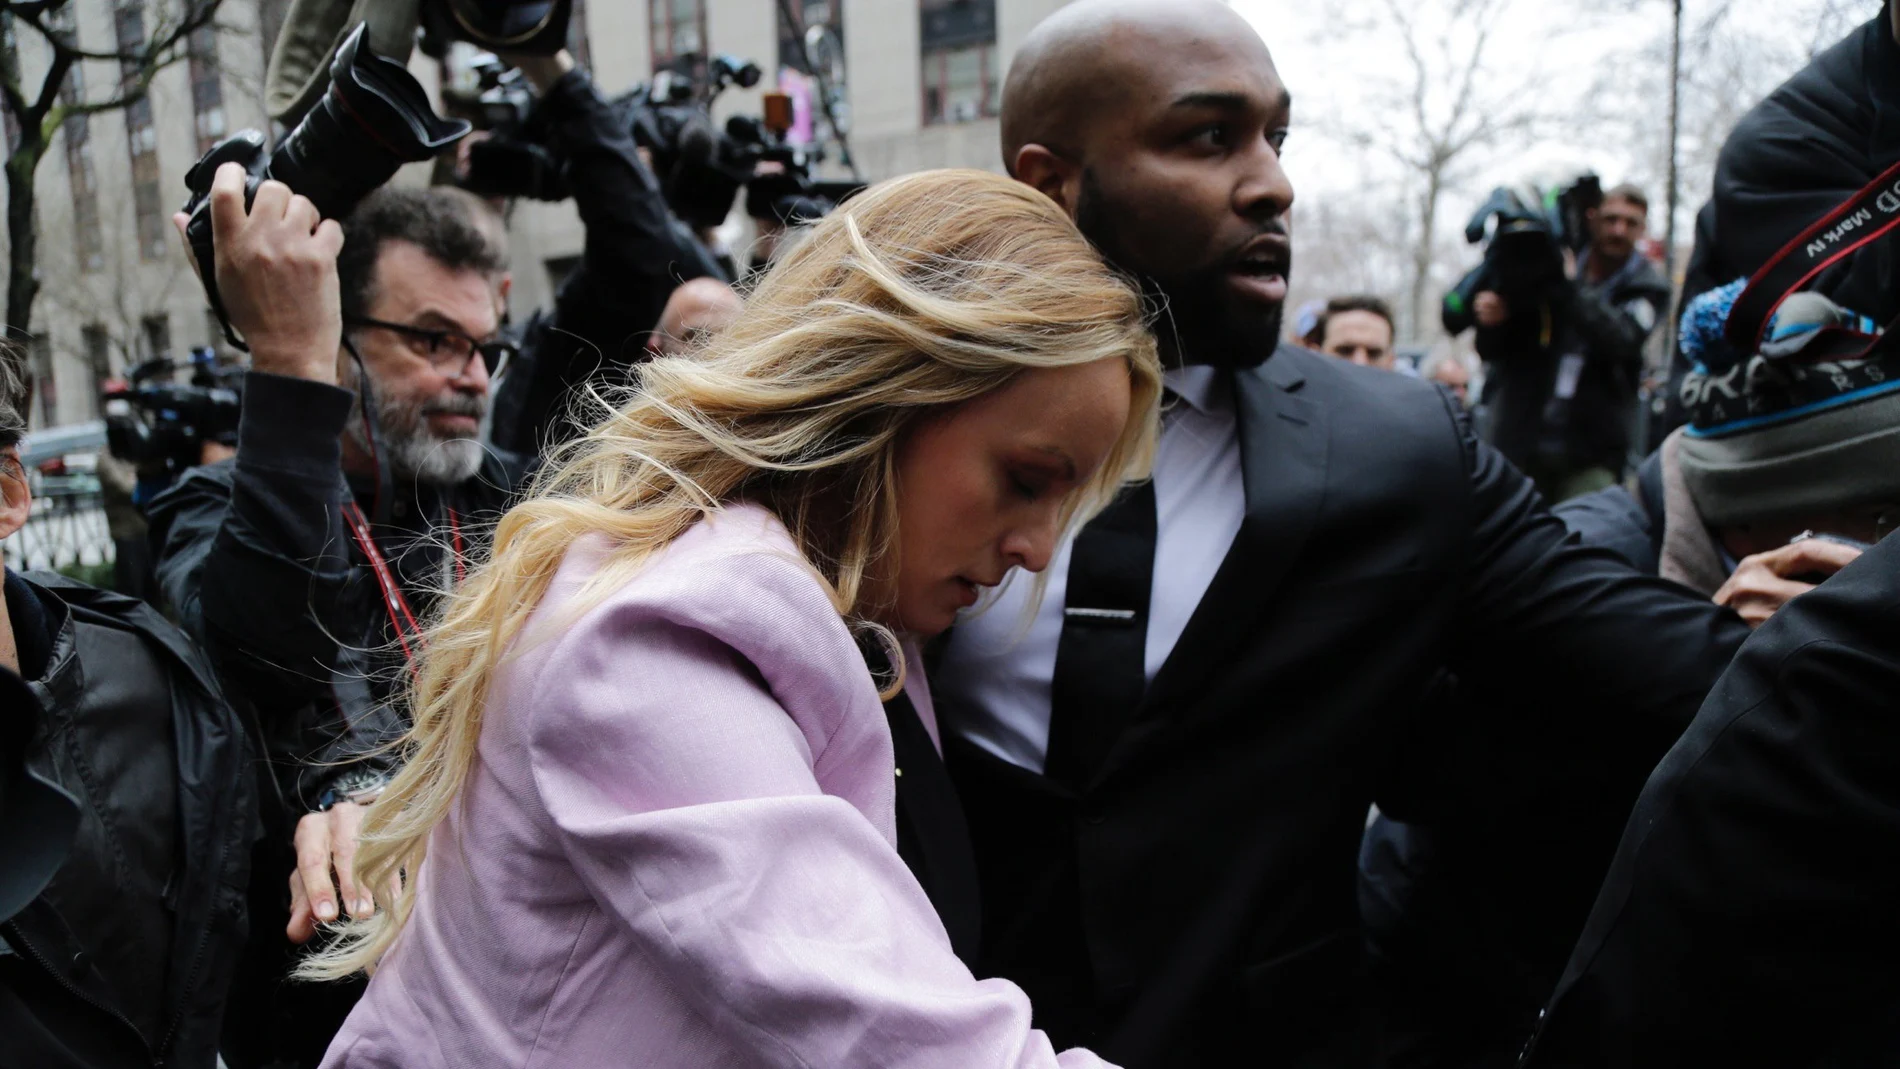 Porn actress Stormy Daniels arrives at federal court, Monday, April 16, 2018, in New York